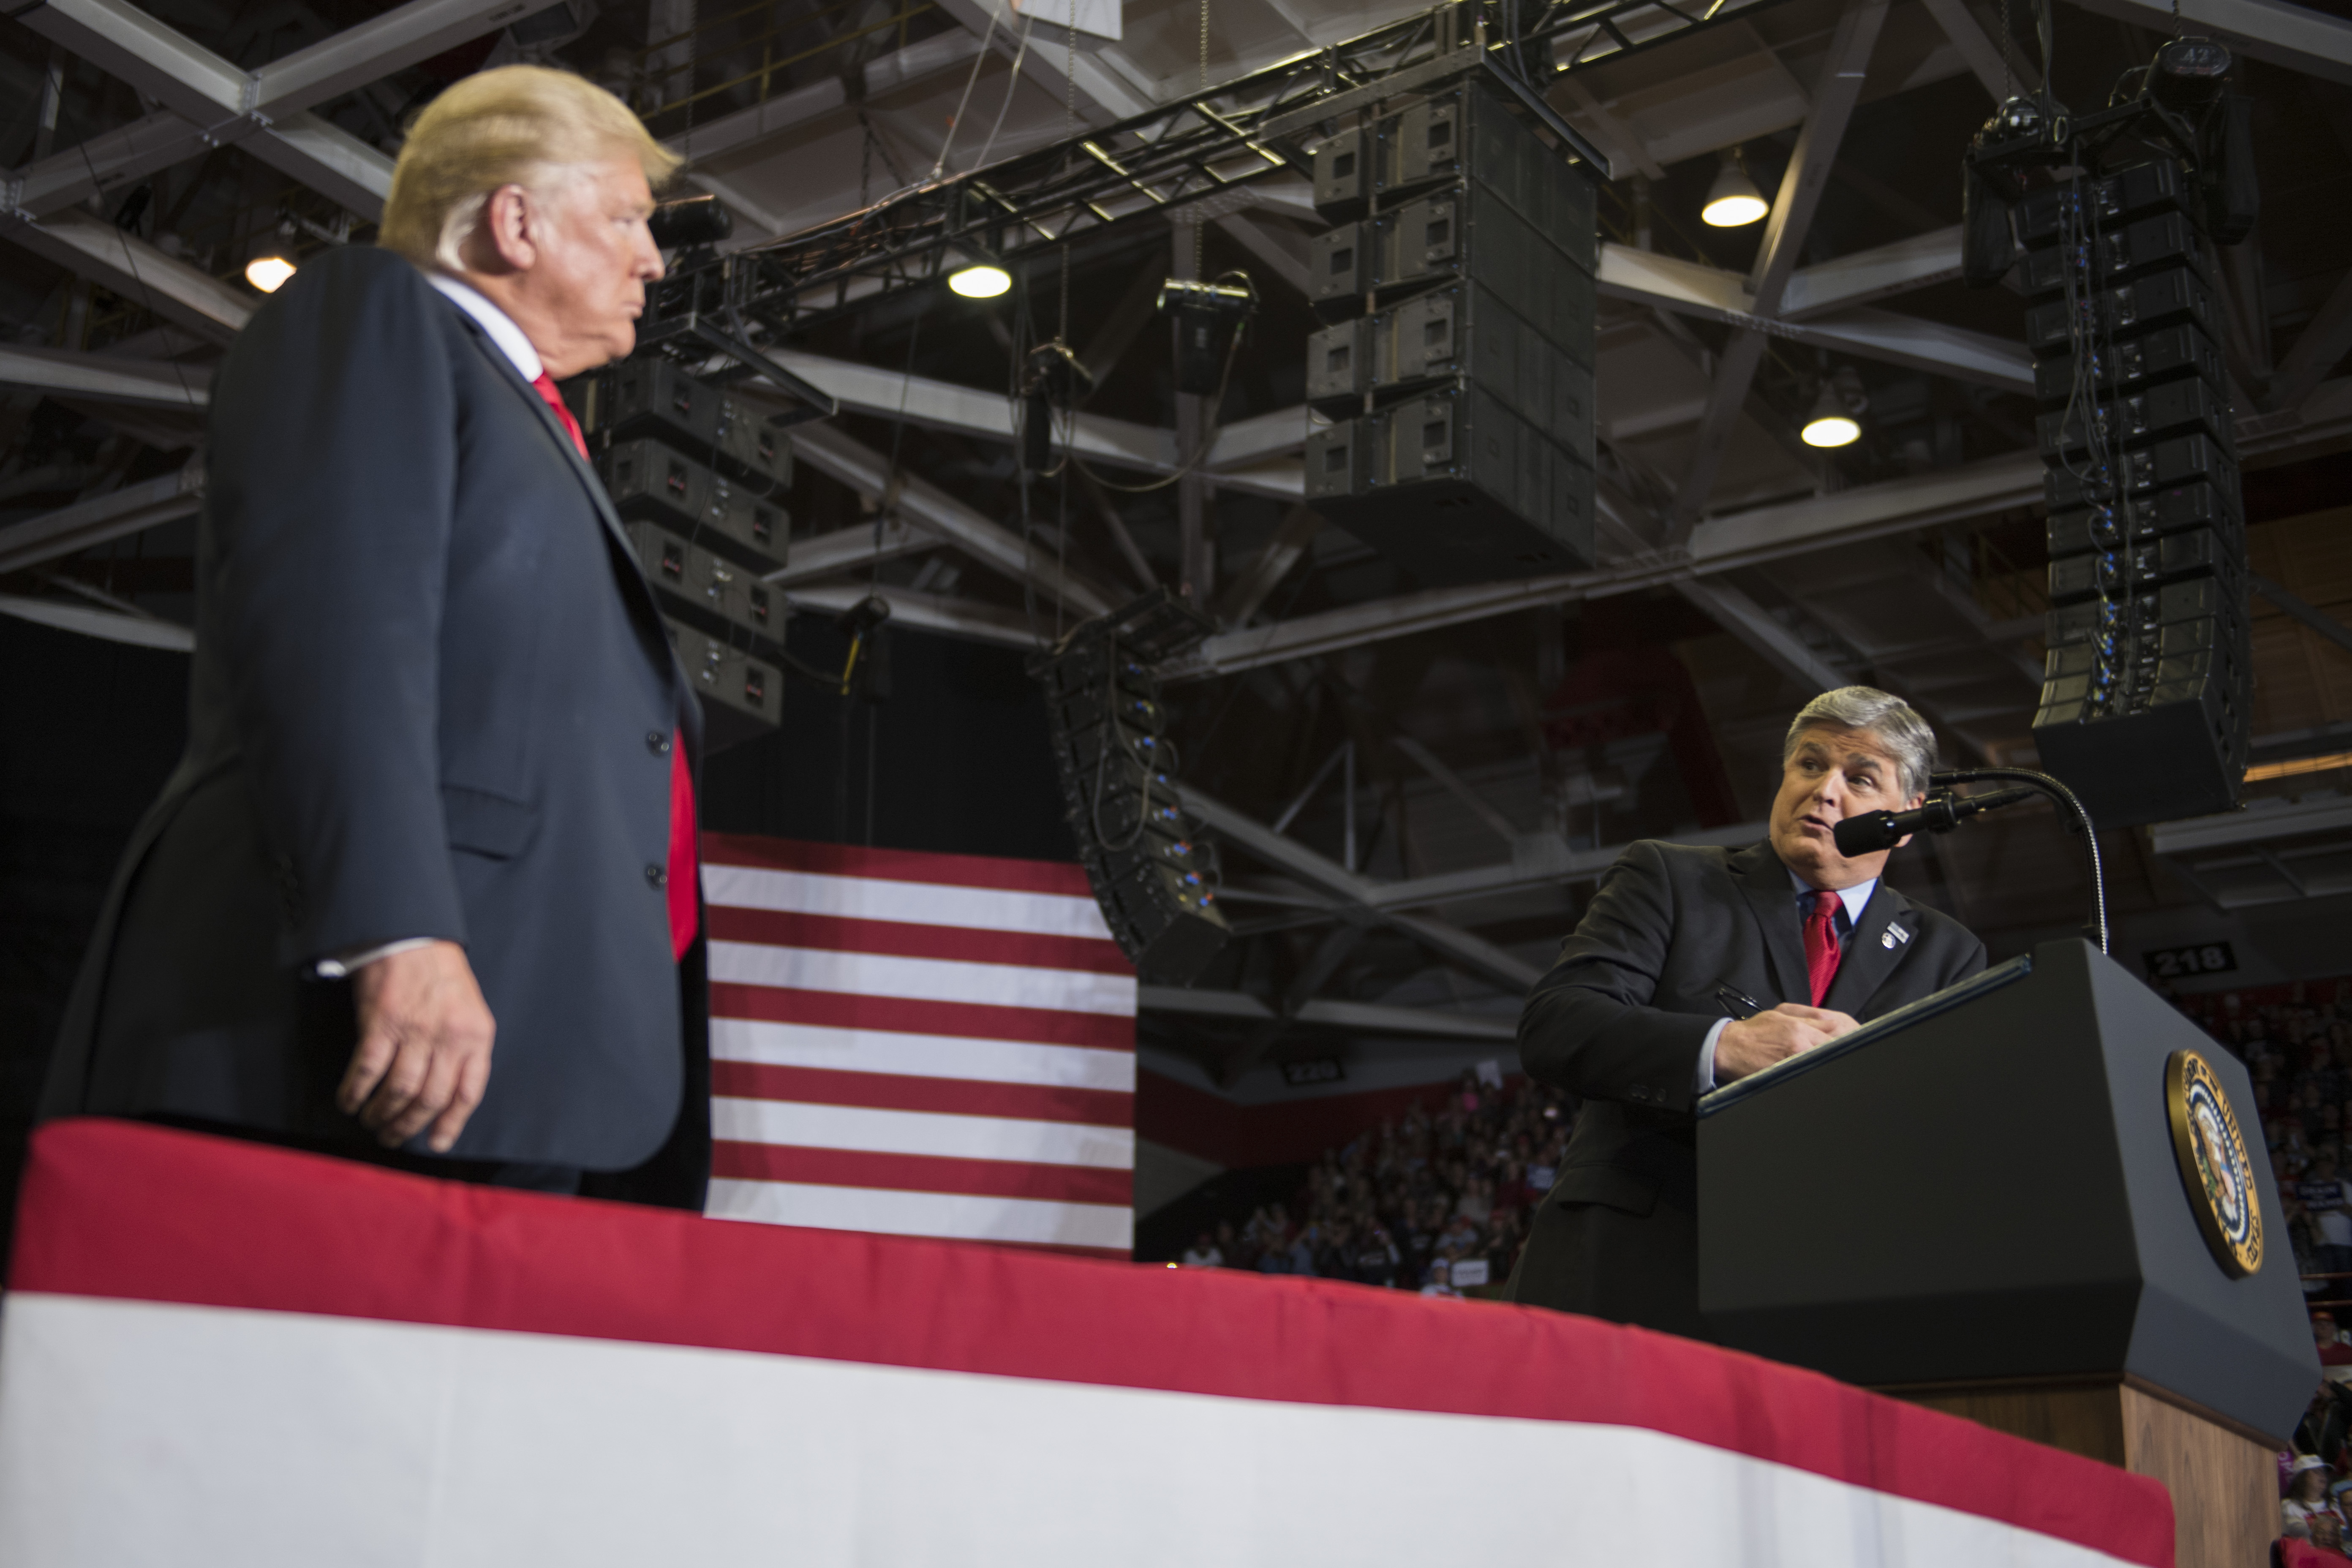 Sean Hannity speaks alongside President Donald Trump at a Make America Great Again rally on Monday in Cape Girardeau, Missouri.